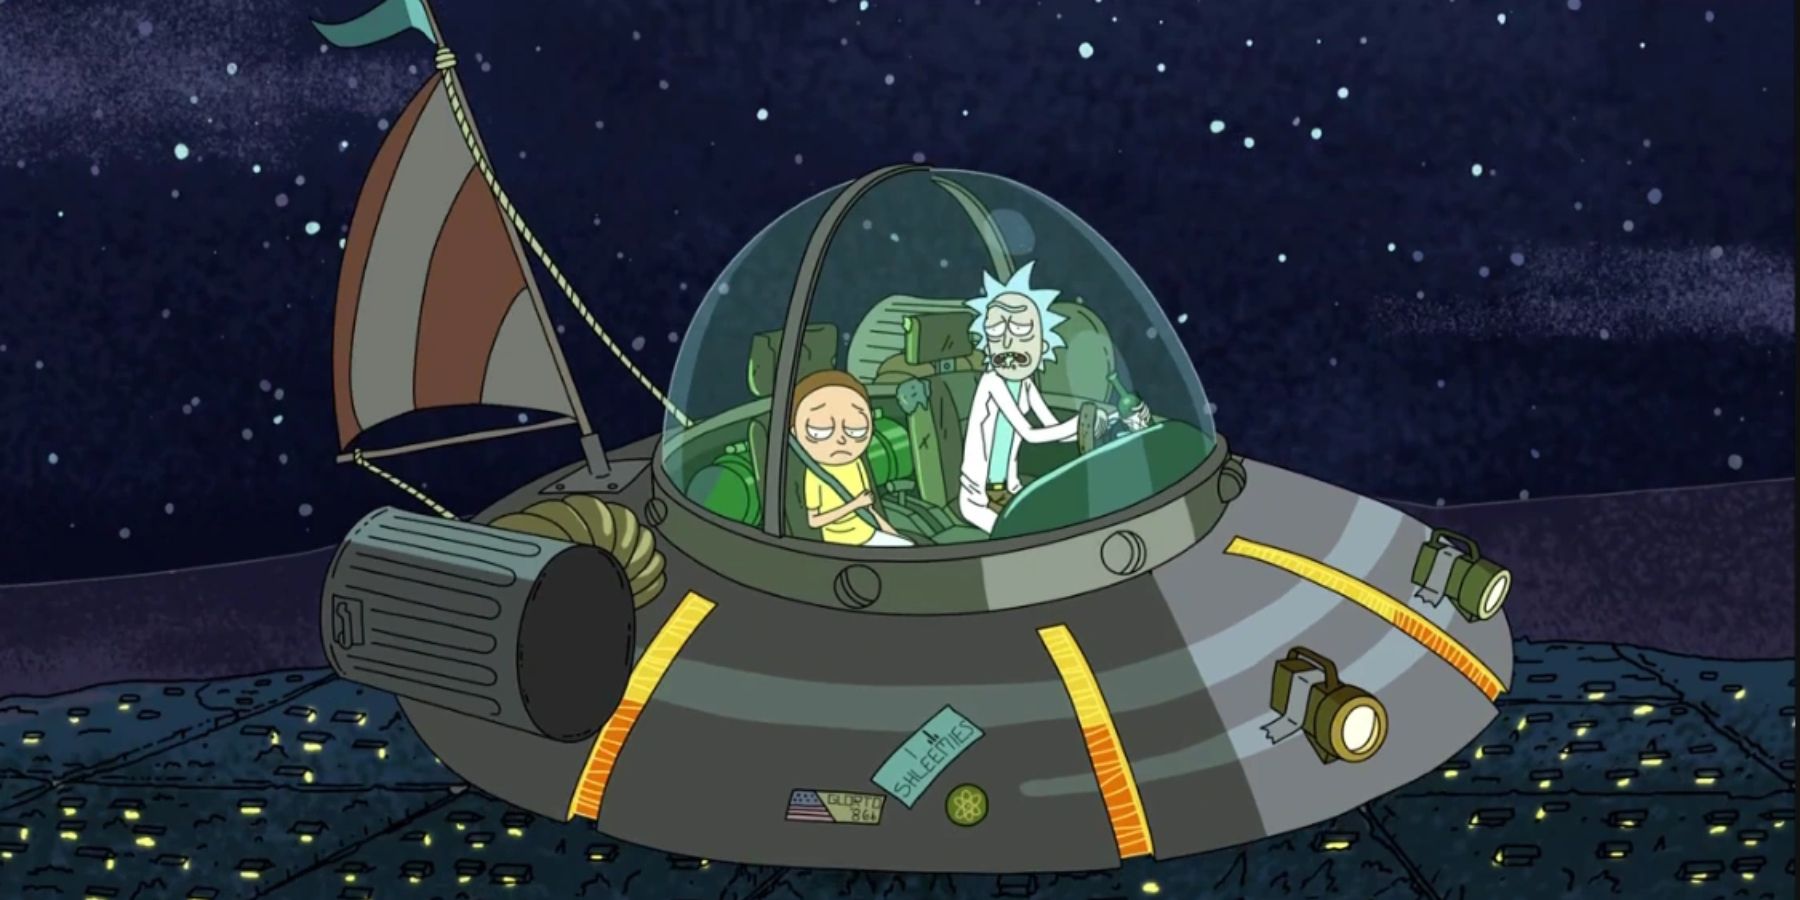 Rick and Morty in the spaceship in Rick and Morty